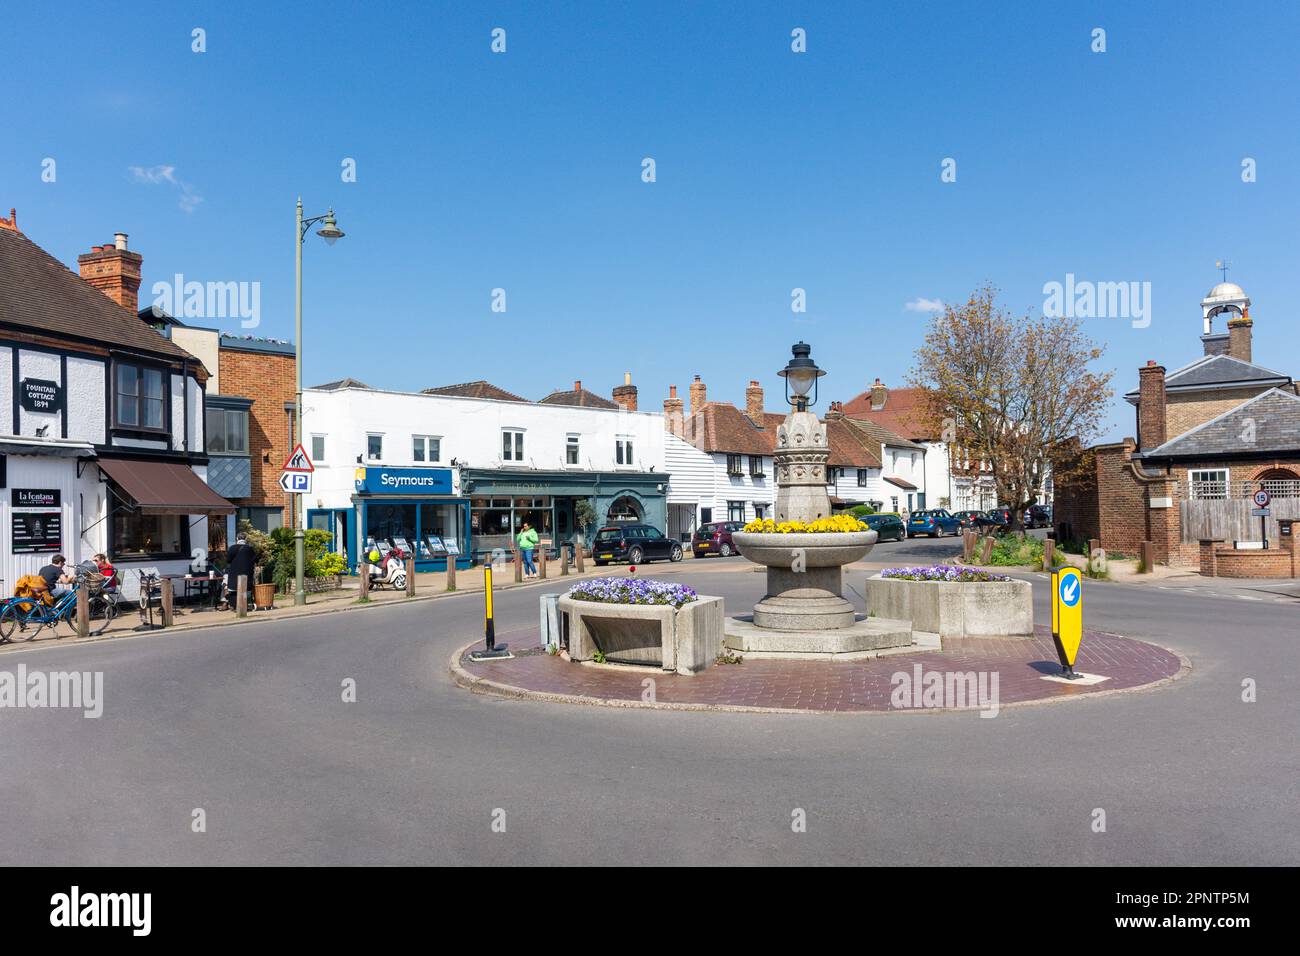 Roundabout Fountain, High Street, Thames Ditton, Surrey, Angleterre, Royaume-Uni Banque D'Images